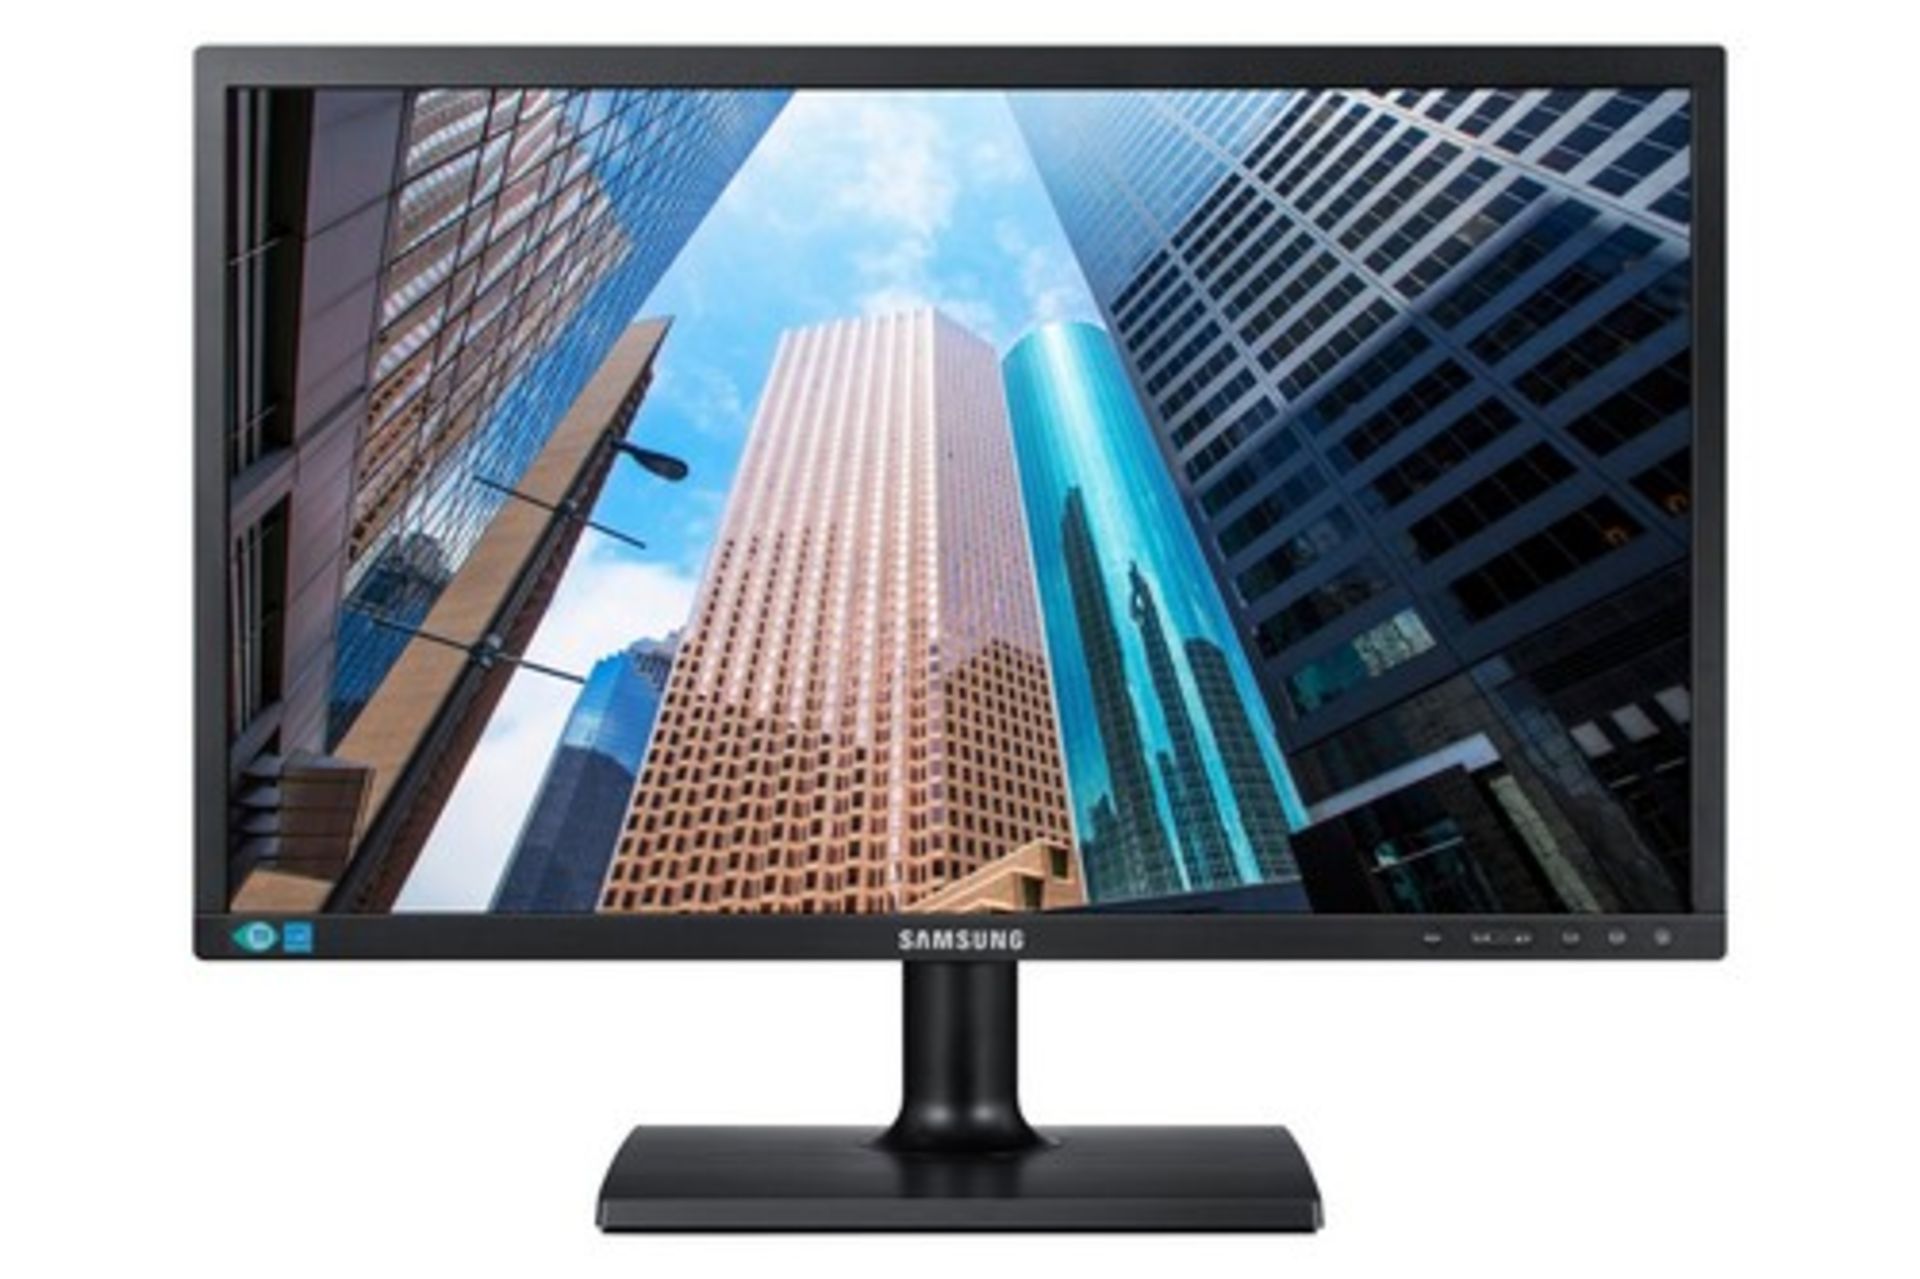 A boxed as new Samsung S22E200B 22" 16:9 1920 x 1080 DVI LED Monitor (Box sealed, cosmetic damage to